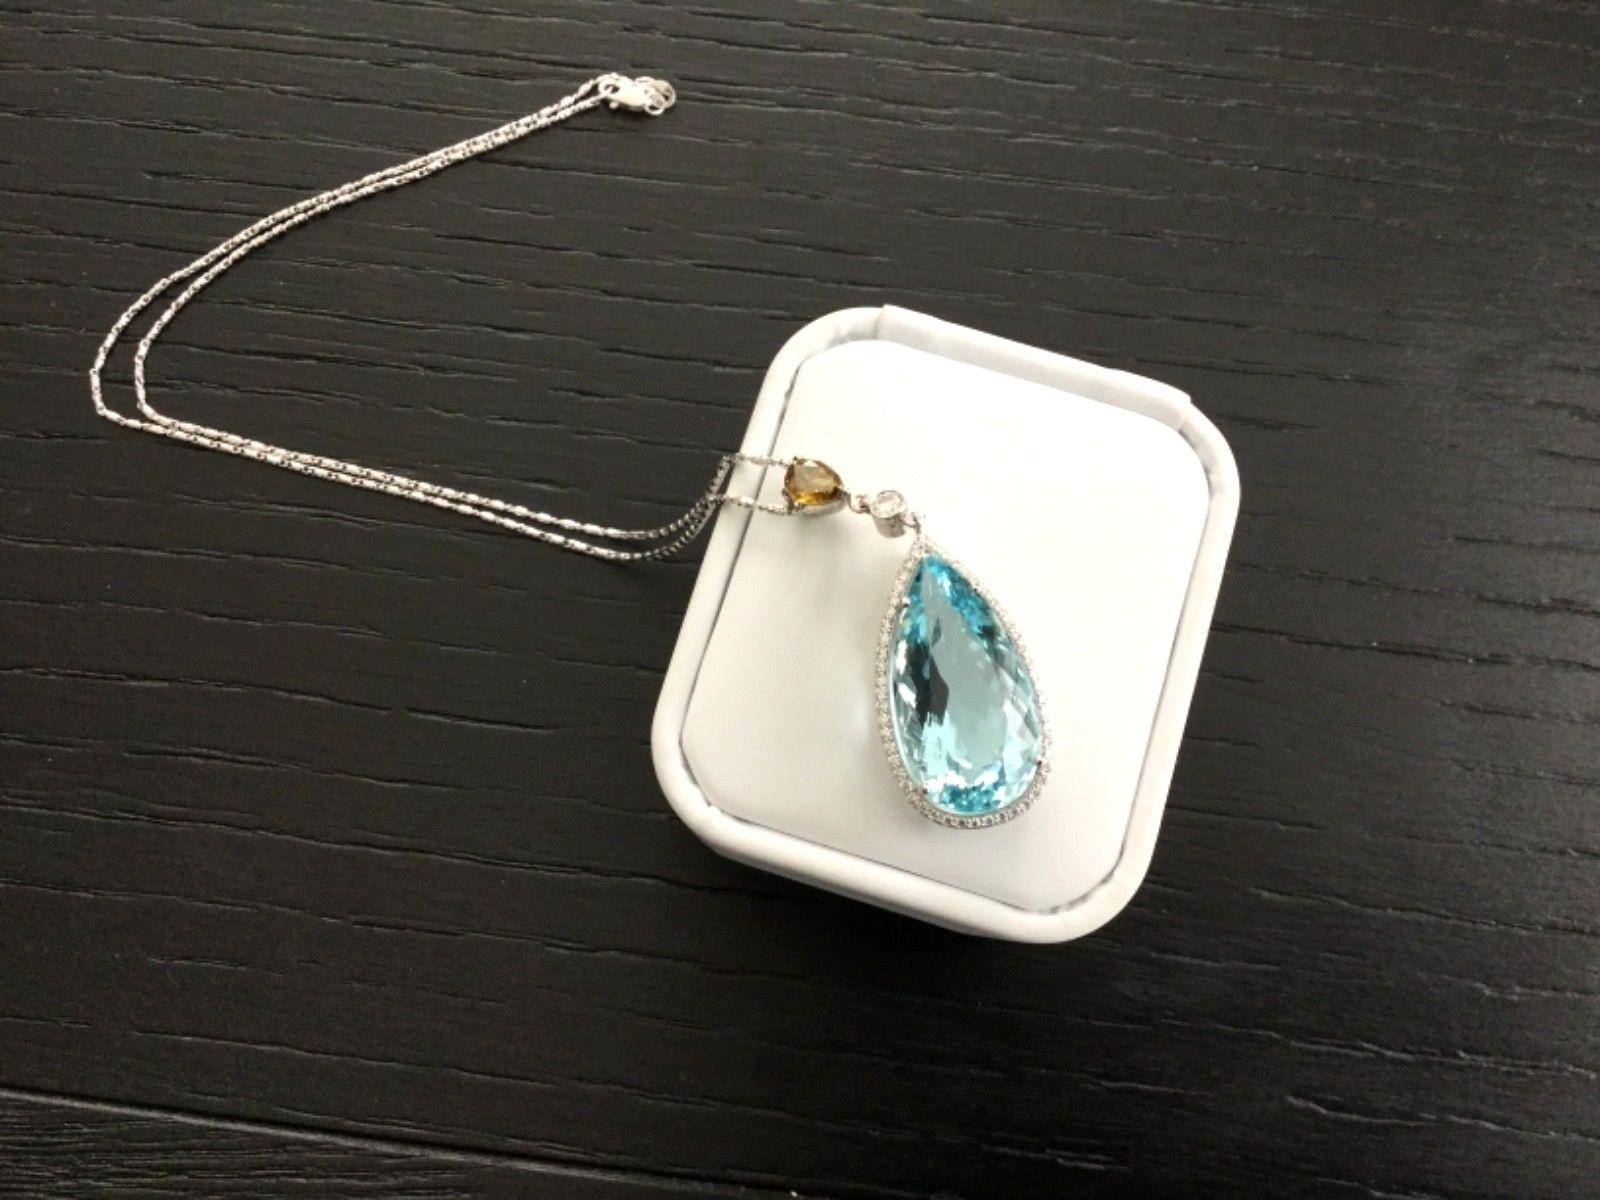 FEBRUARY MARCH SPECIAL - MARKED DOWN $1000! To $6995!

For your consideration is a 17.19 carat pear shaped, natural, transparent, greenish blue aquamarine set in a brand new 14k white gold setting with approximately .20 carats of natural G color VS